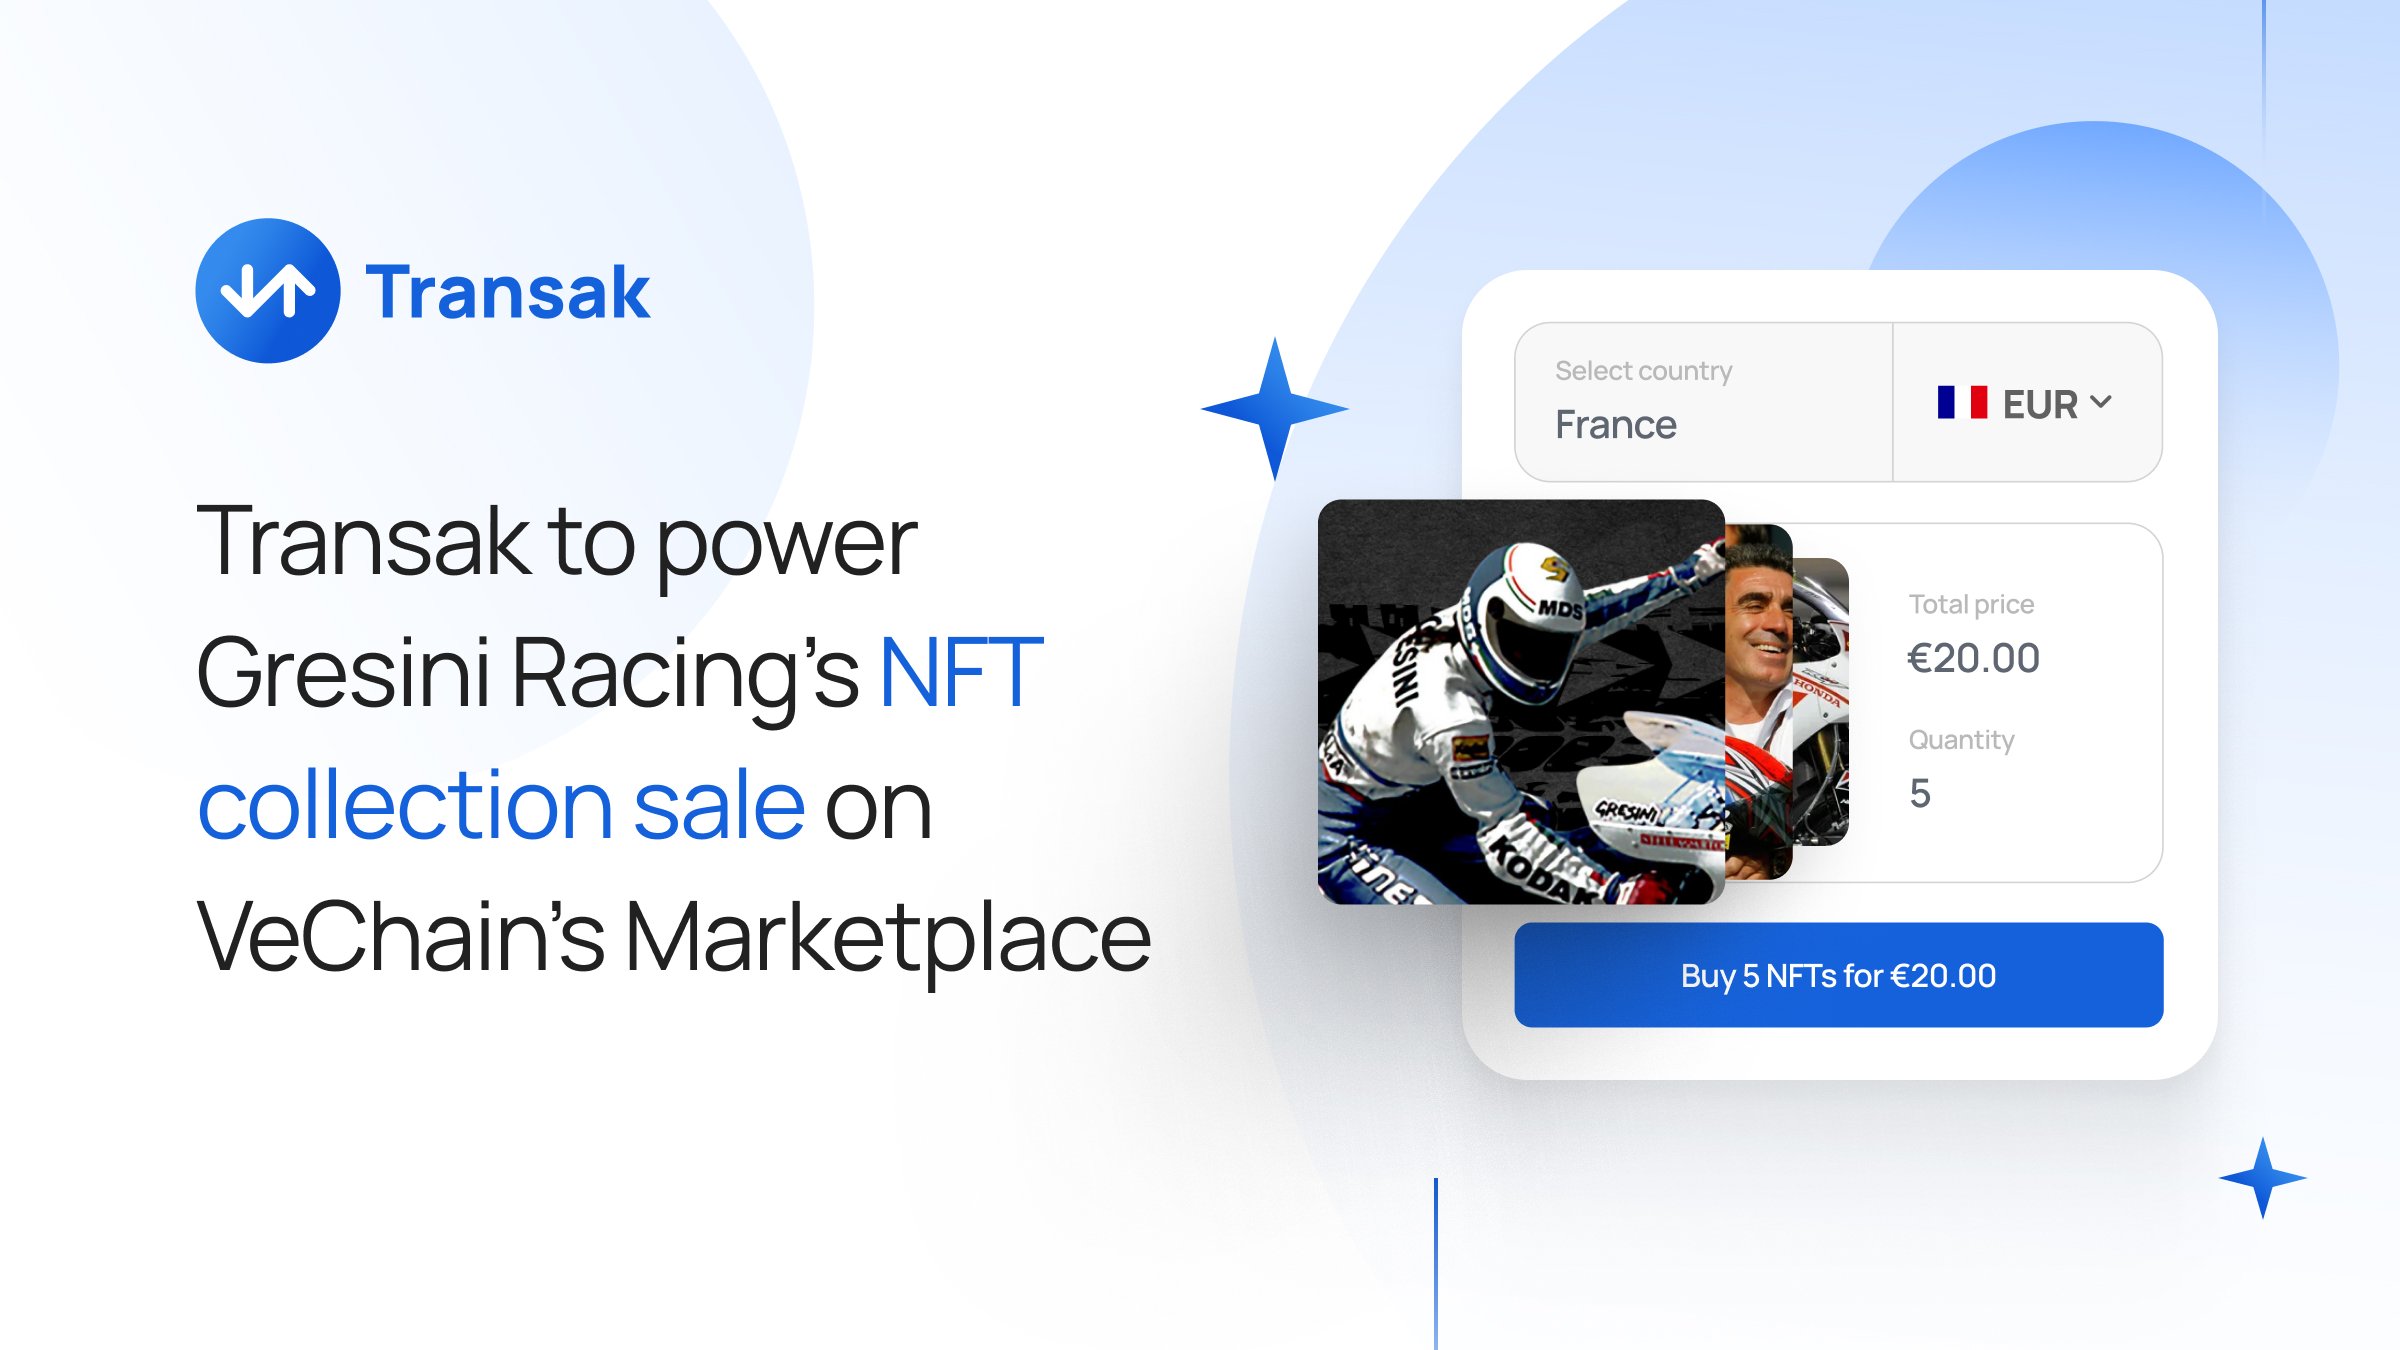 Transak to power Gresini Racing’s NFT collection sale on VeChain’s Marketplace as-a-service - cover (1)